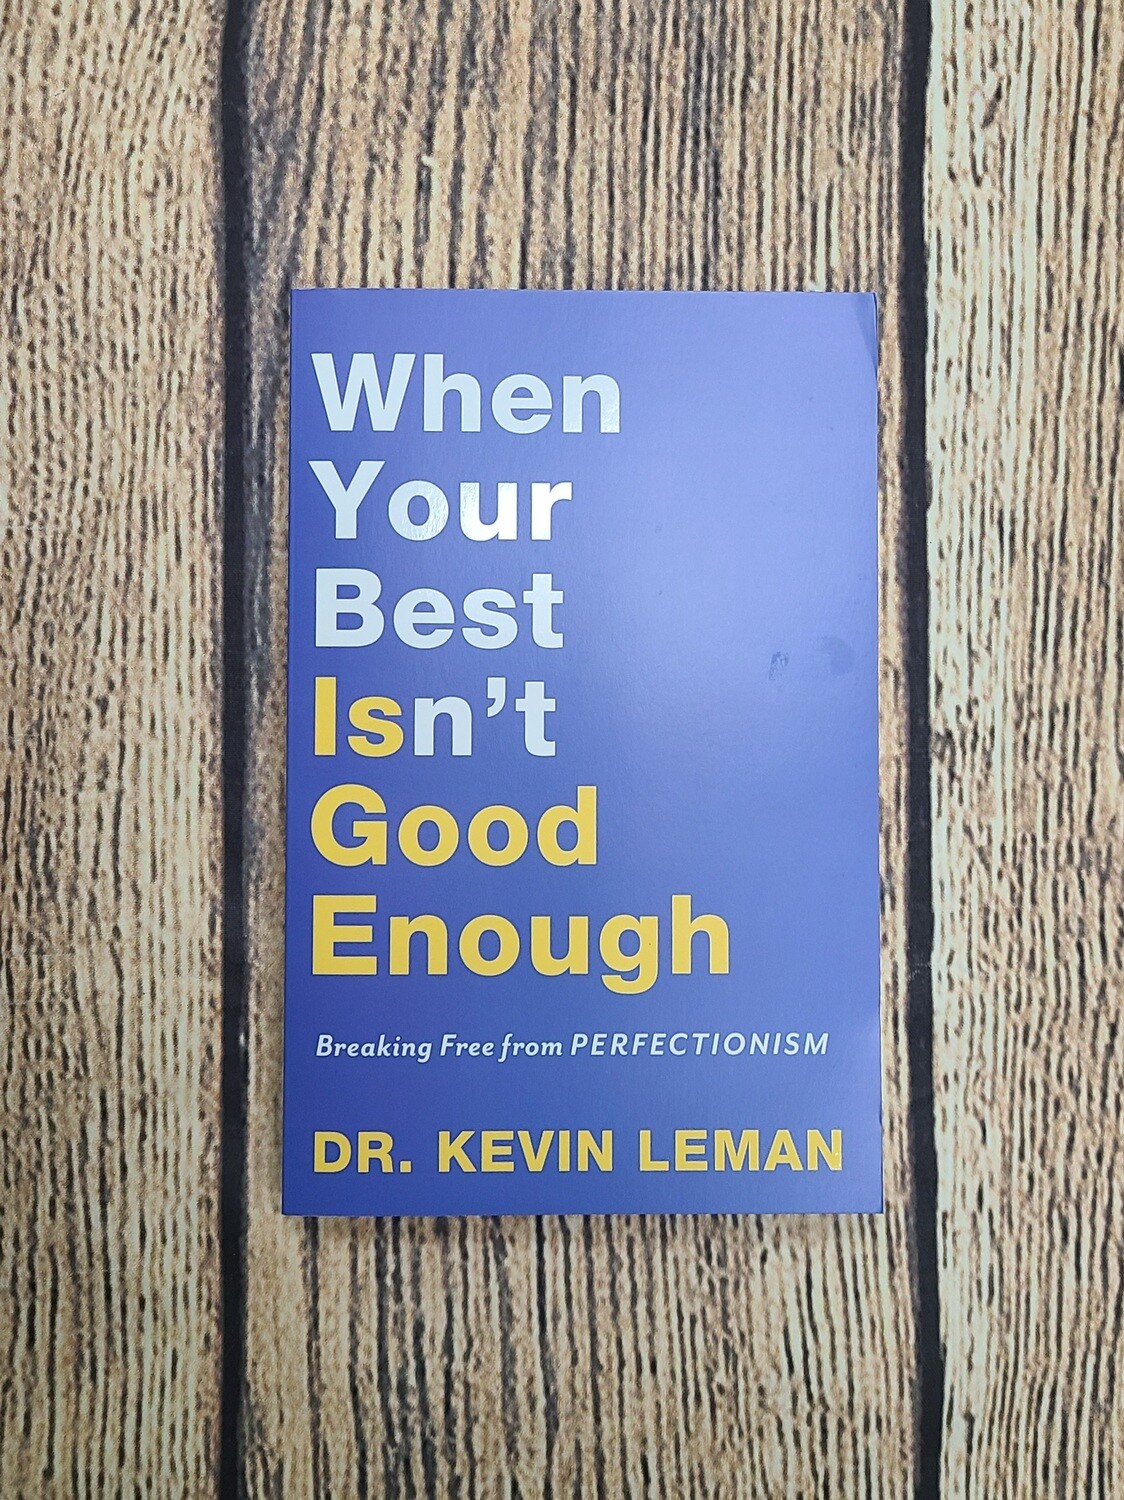 When Your Best Isn't Good Enough: Breaking Free from Perfectionism by Dr. Kevin Leman